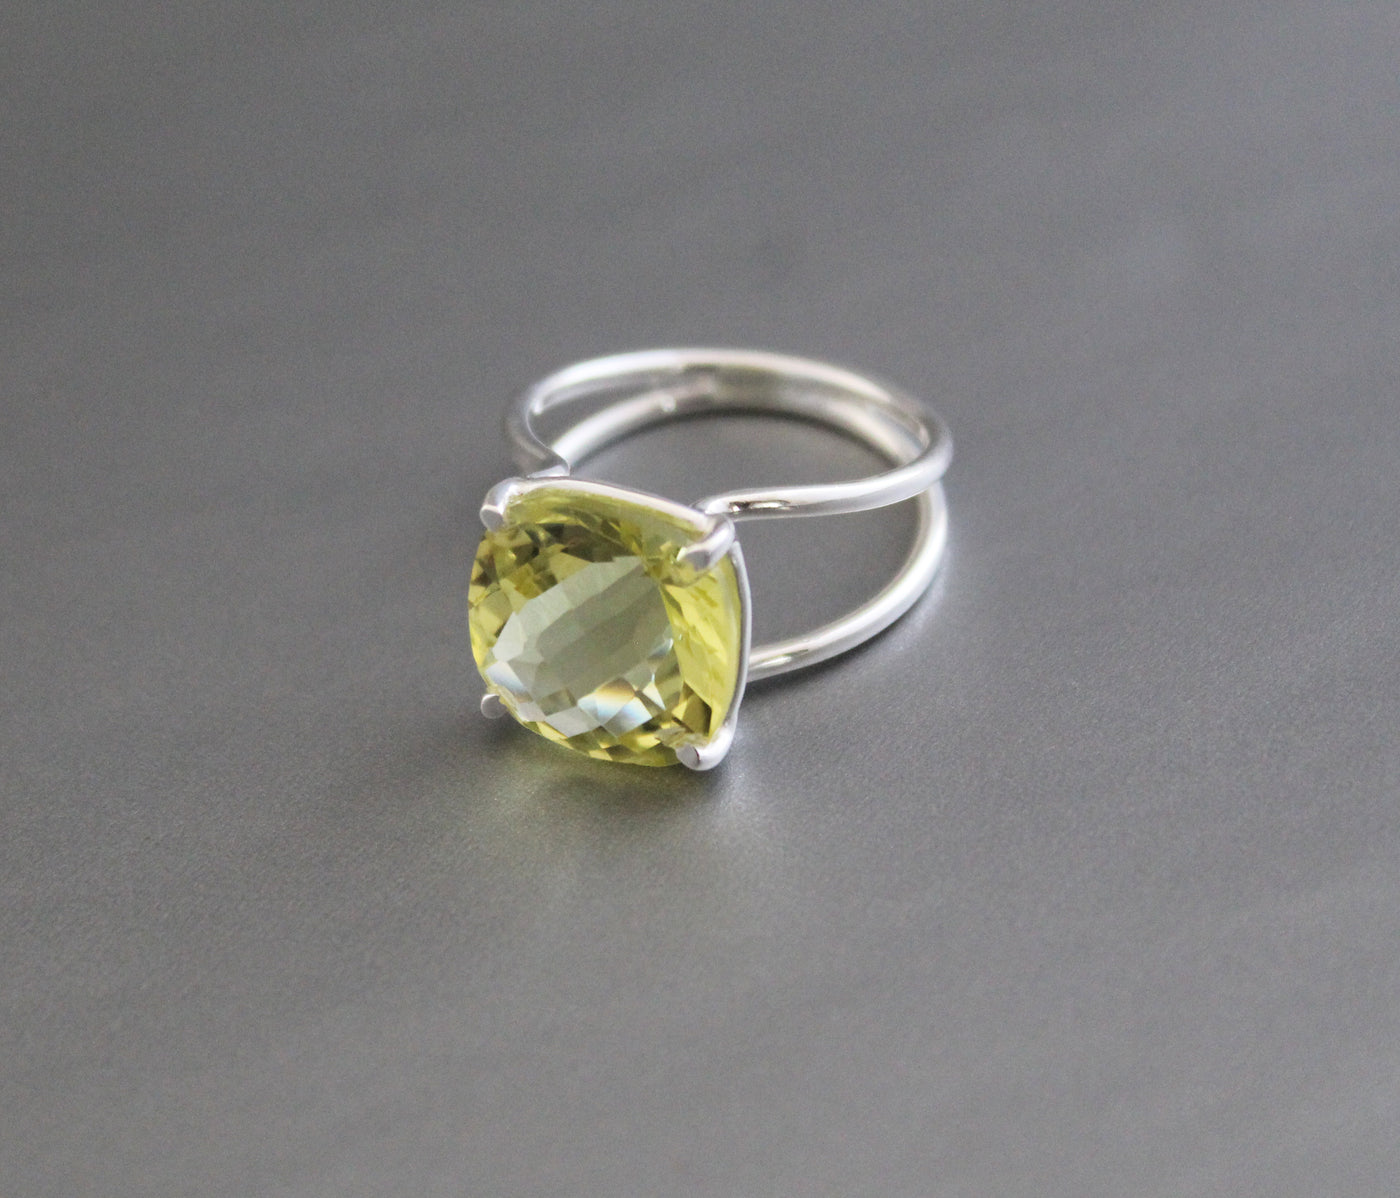 Lemon Quartz Ring, Silver Rings, Rings for Women, Promise Ring, Crystal ring, Silver Jewelry, Gift for Her, Stackable Rings,Bridesmaid Gift